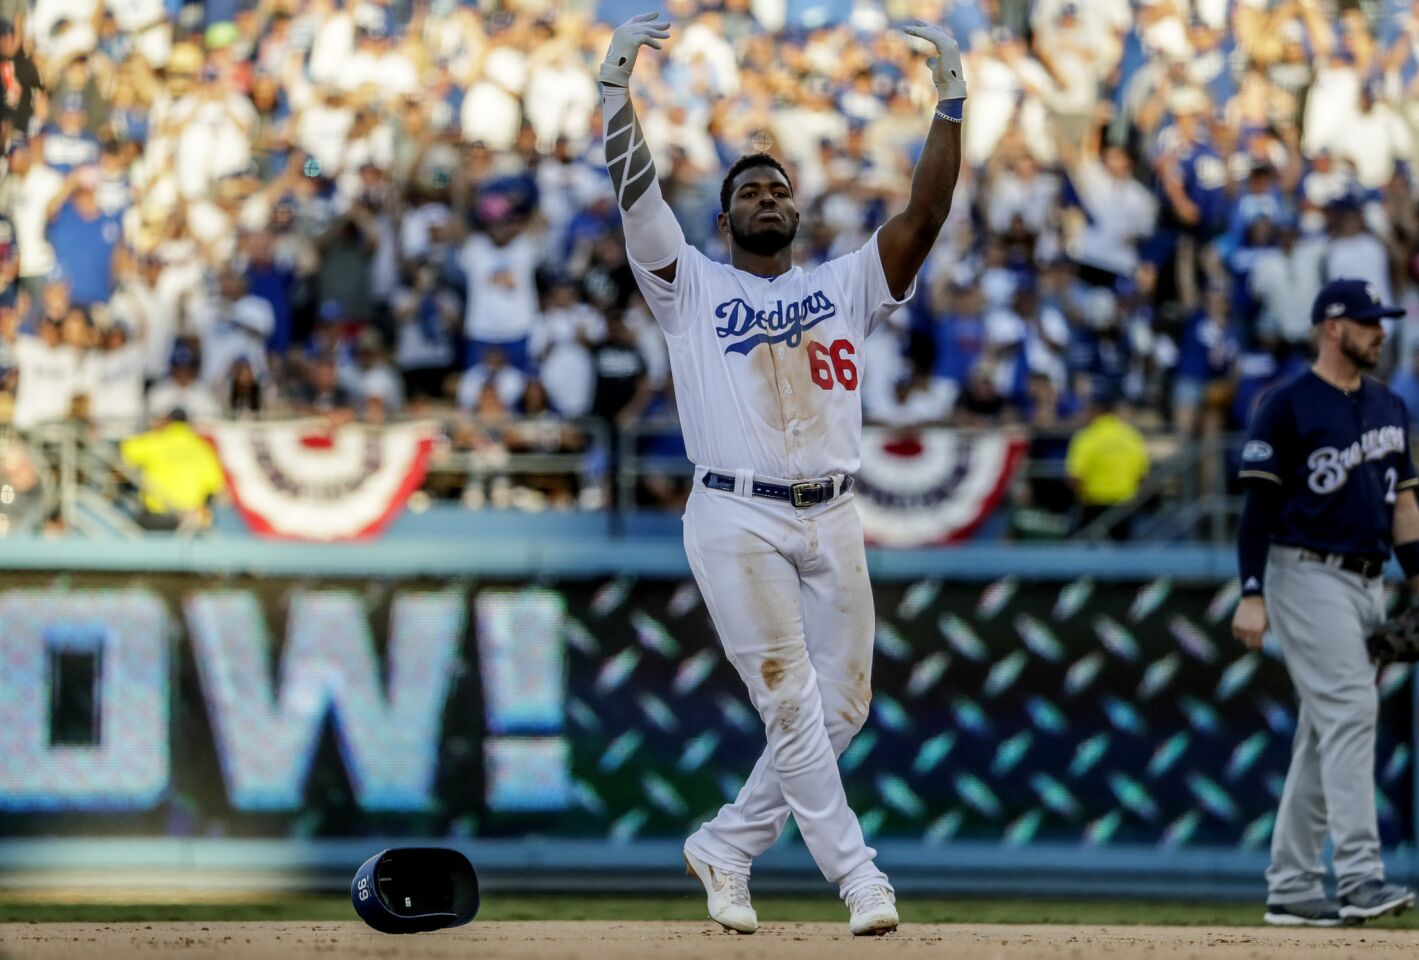 Dodgers Yasiel Puig celebrates hitting a double in the eighth inning.